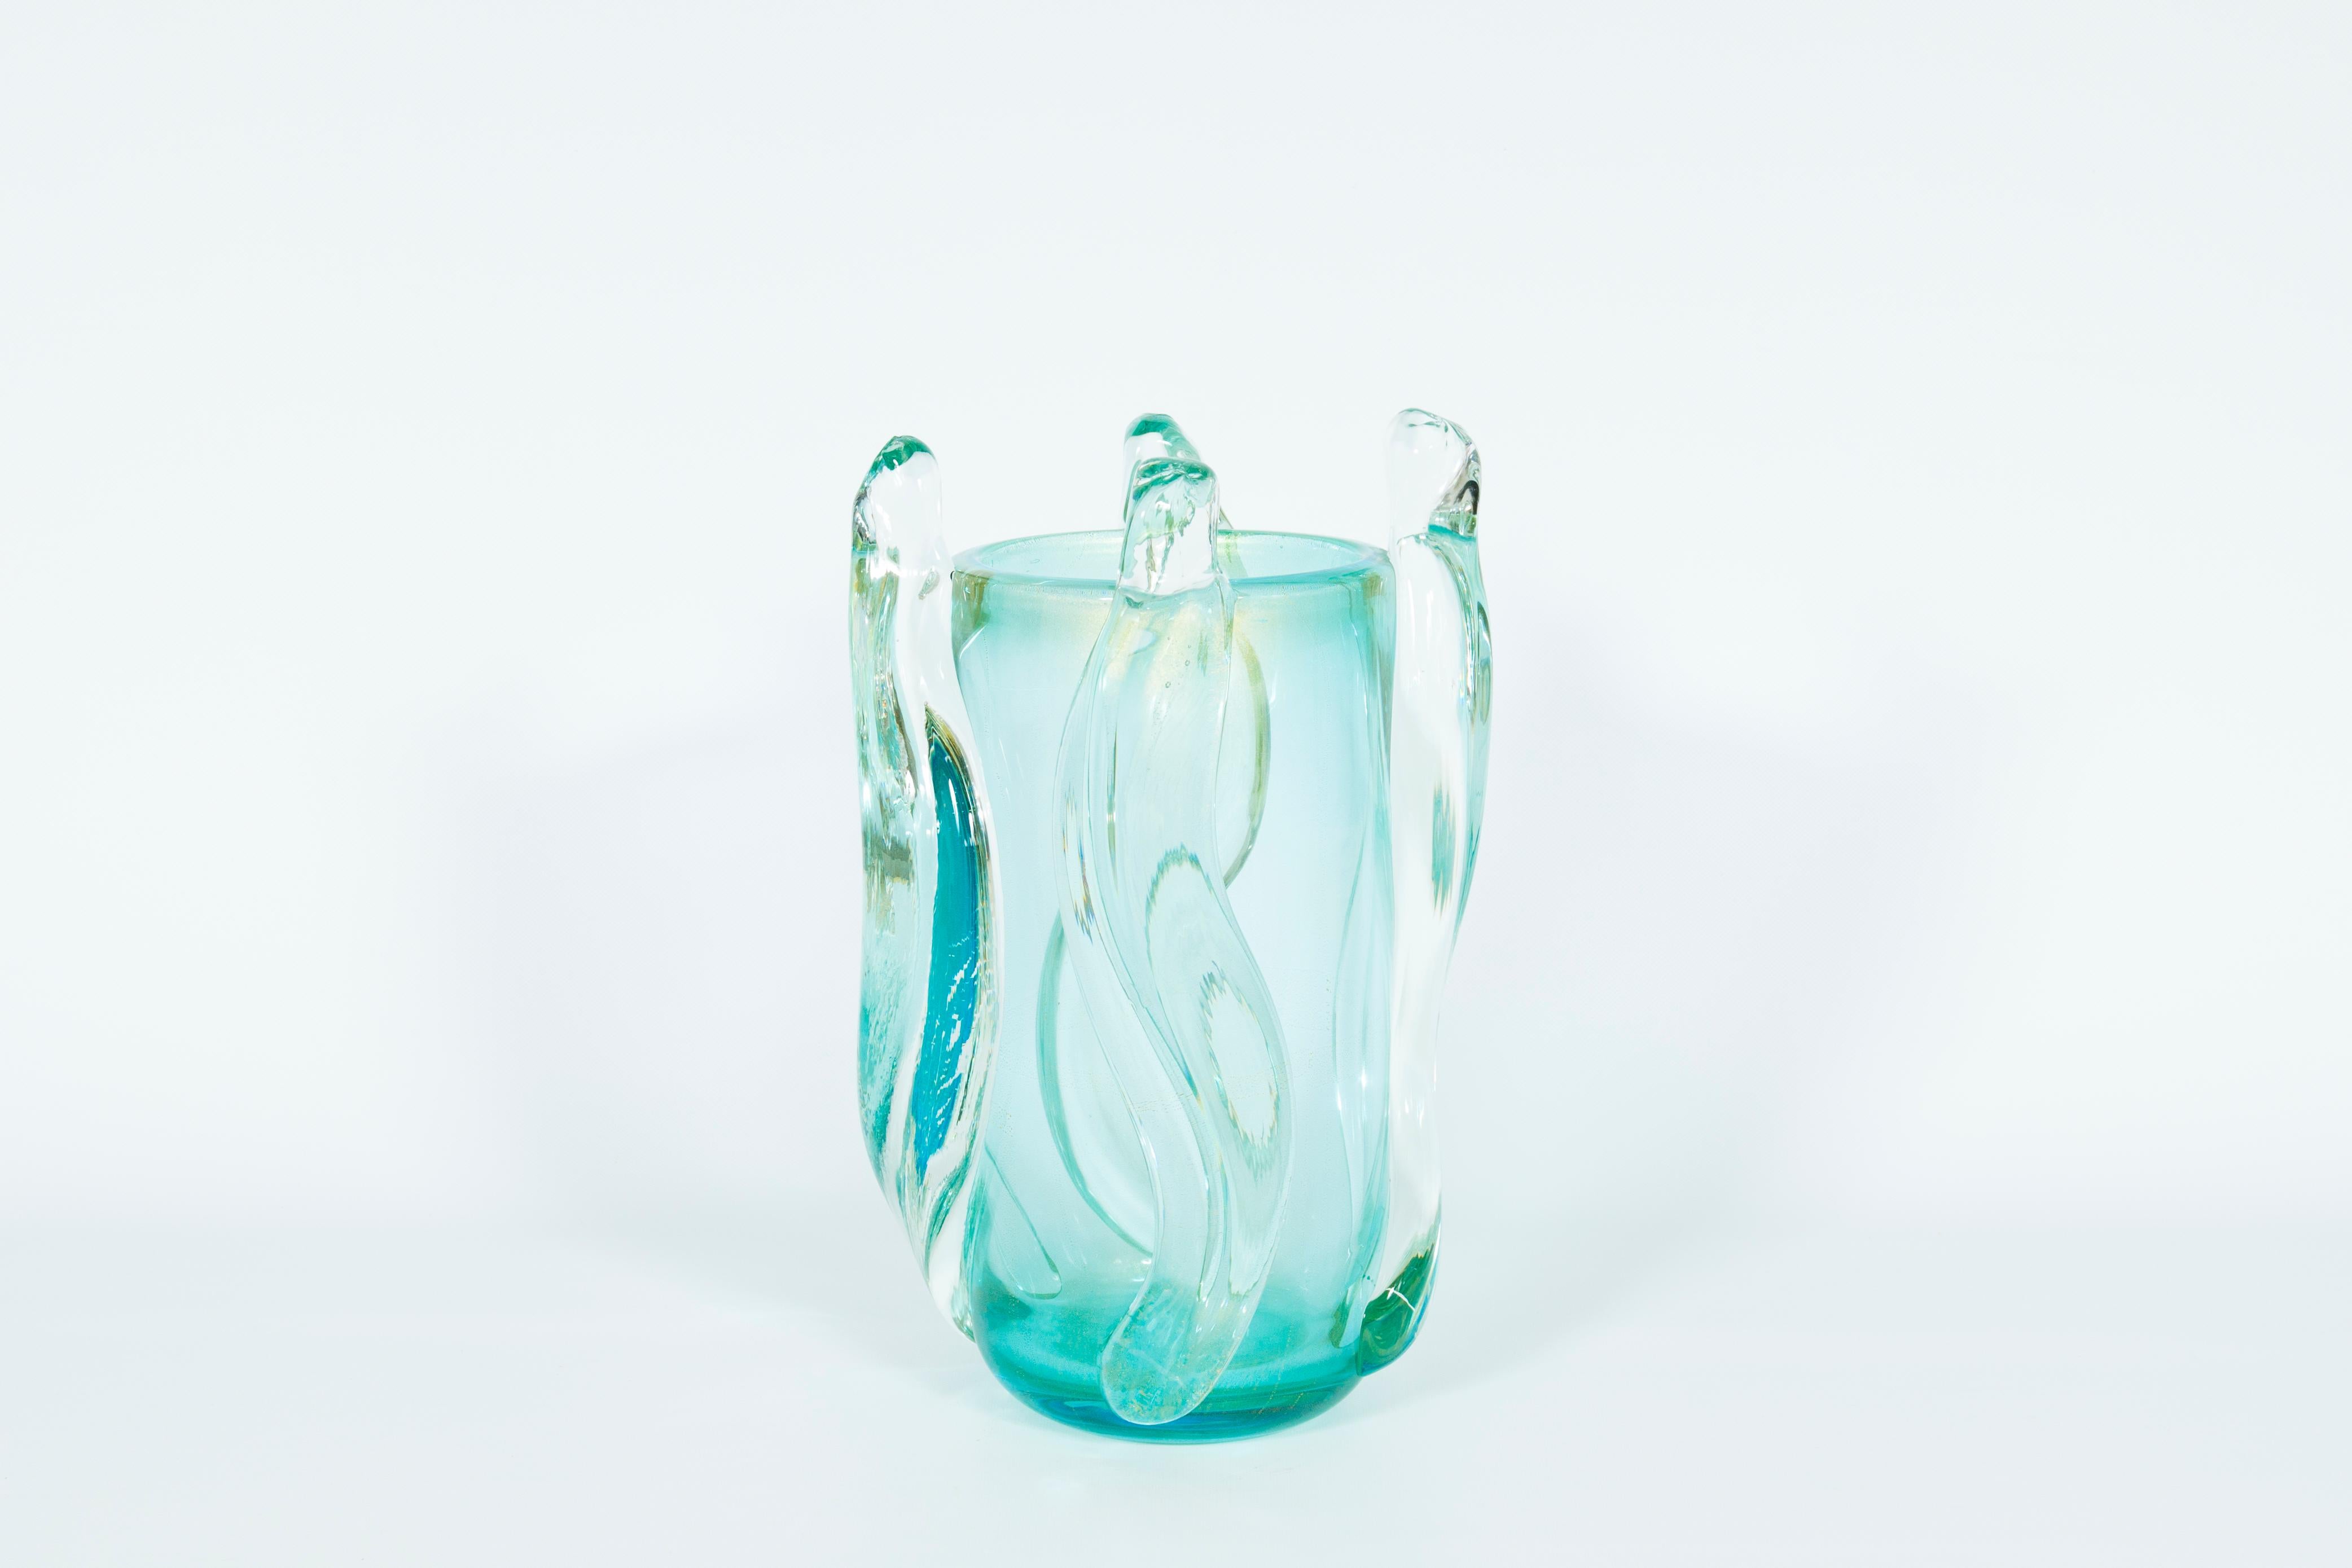 Grandiose Ice toned Murano Vase with Fluid sculptured Curves Contemporary Italy. This magnificent vase, crafted entirely by hand in Murano glass, is a testament to the artistry and craftsmanship of Italian glassmaking. Its thick, translucent